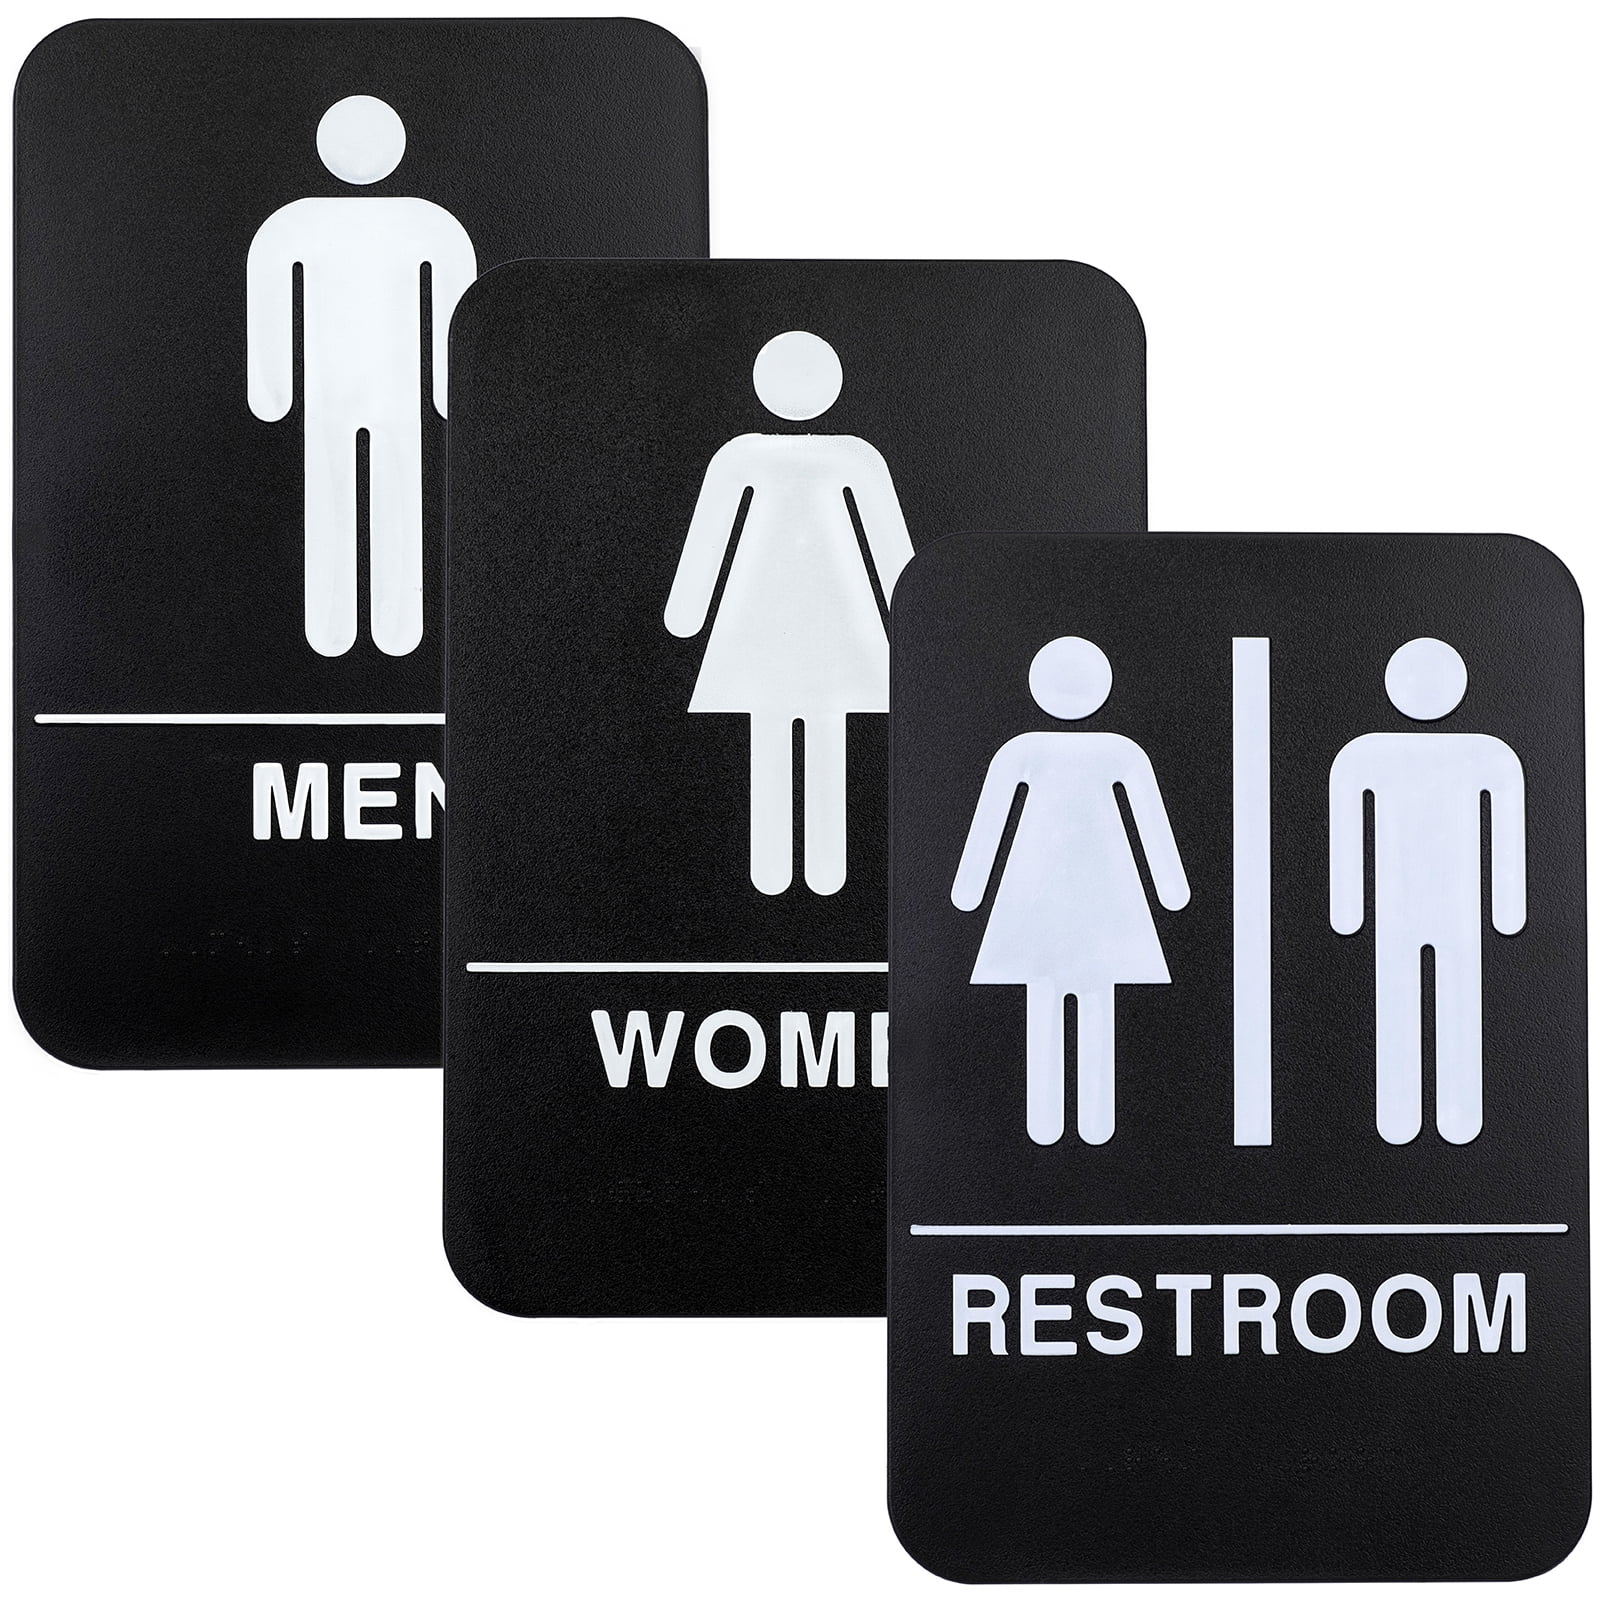 Excello Global Products Plastic Restroom Sign Easy To Mount With Braille Ada Compliant Great For Business Restaurants 6 X9 Men Women Unisex Egp Hd 0035 Walmart Com